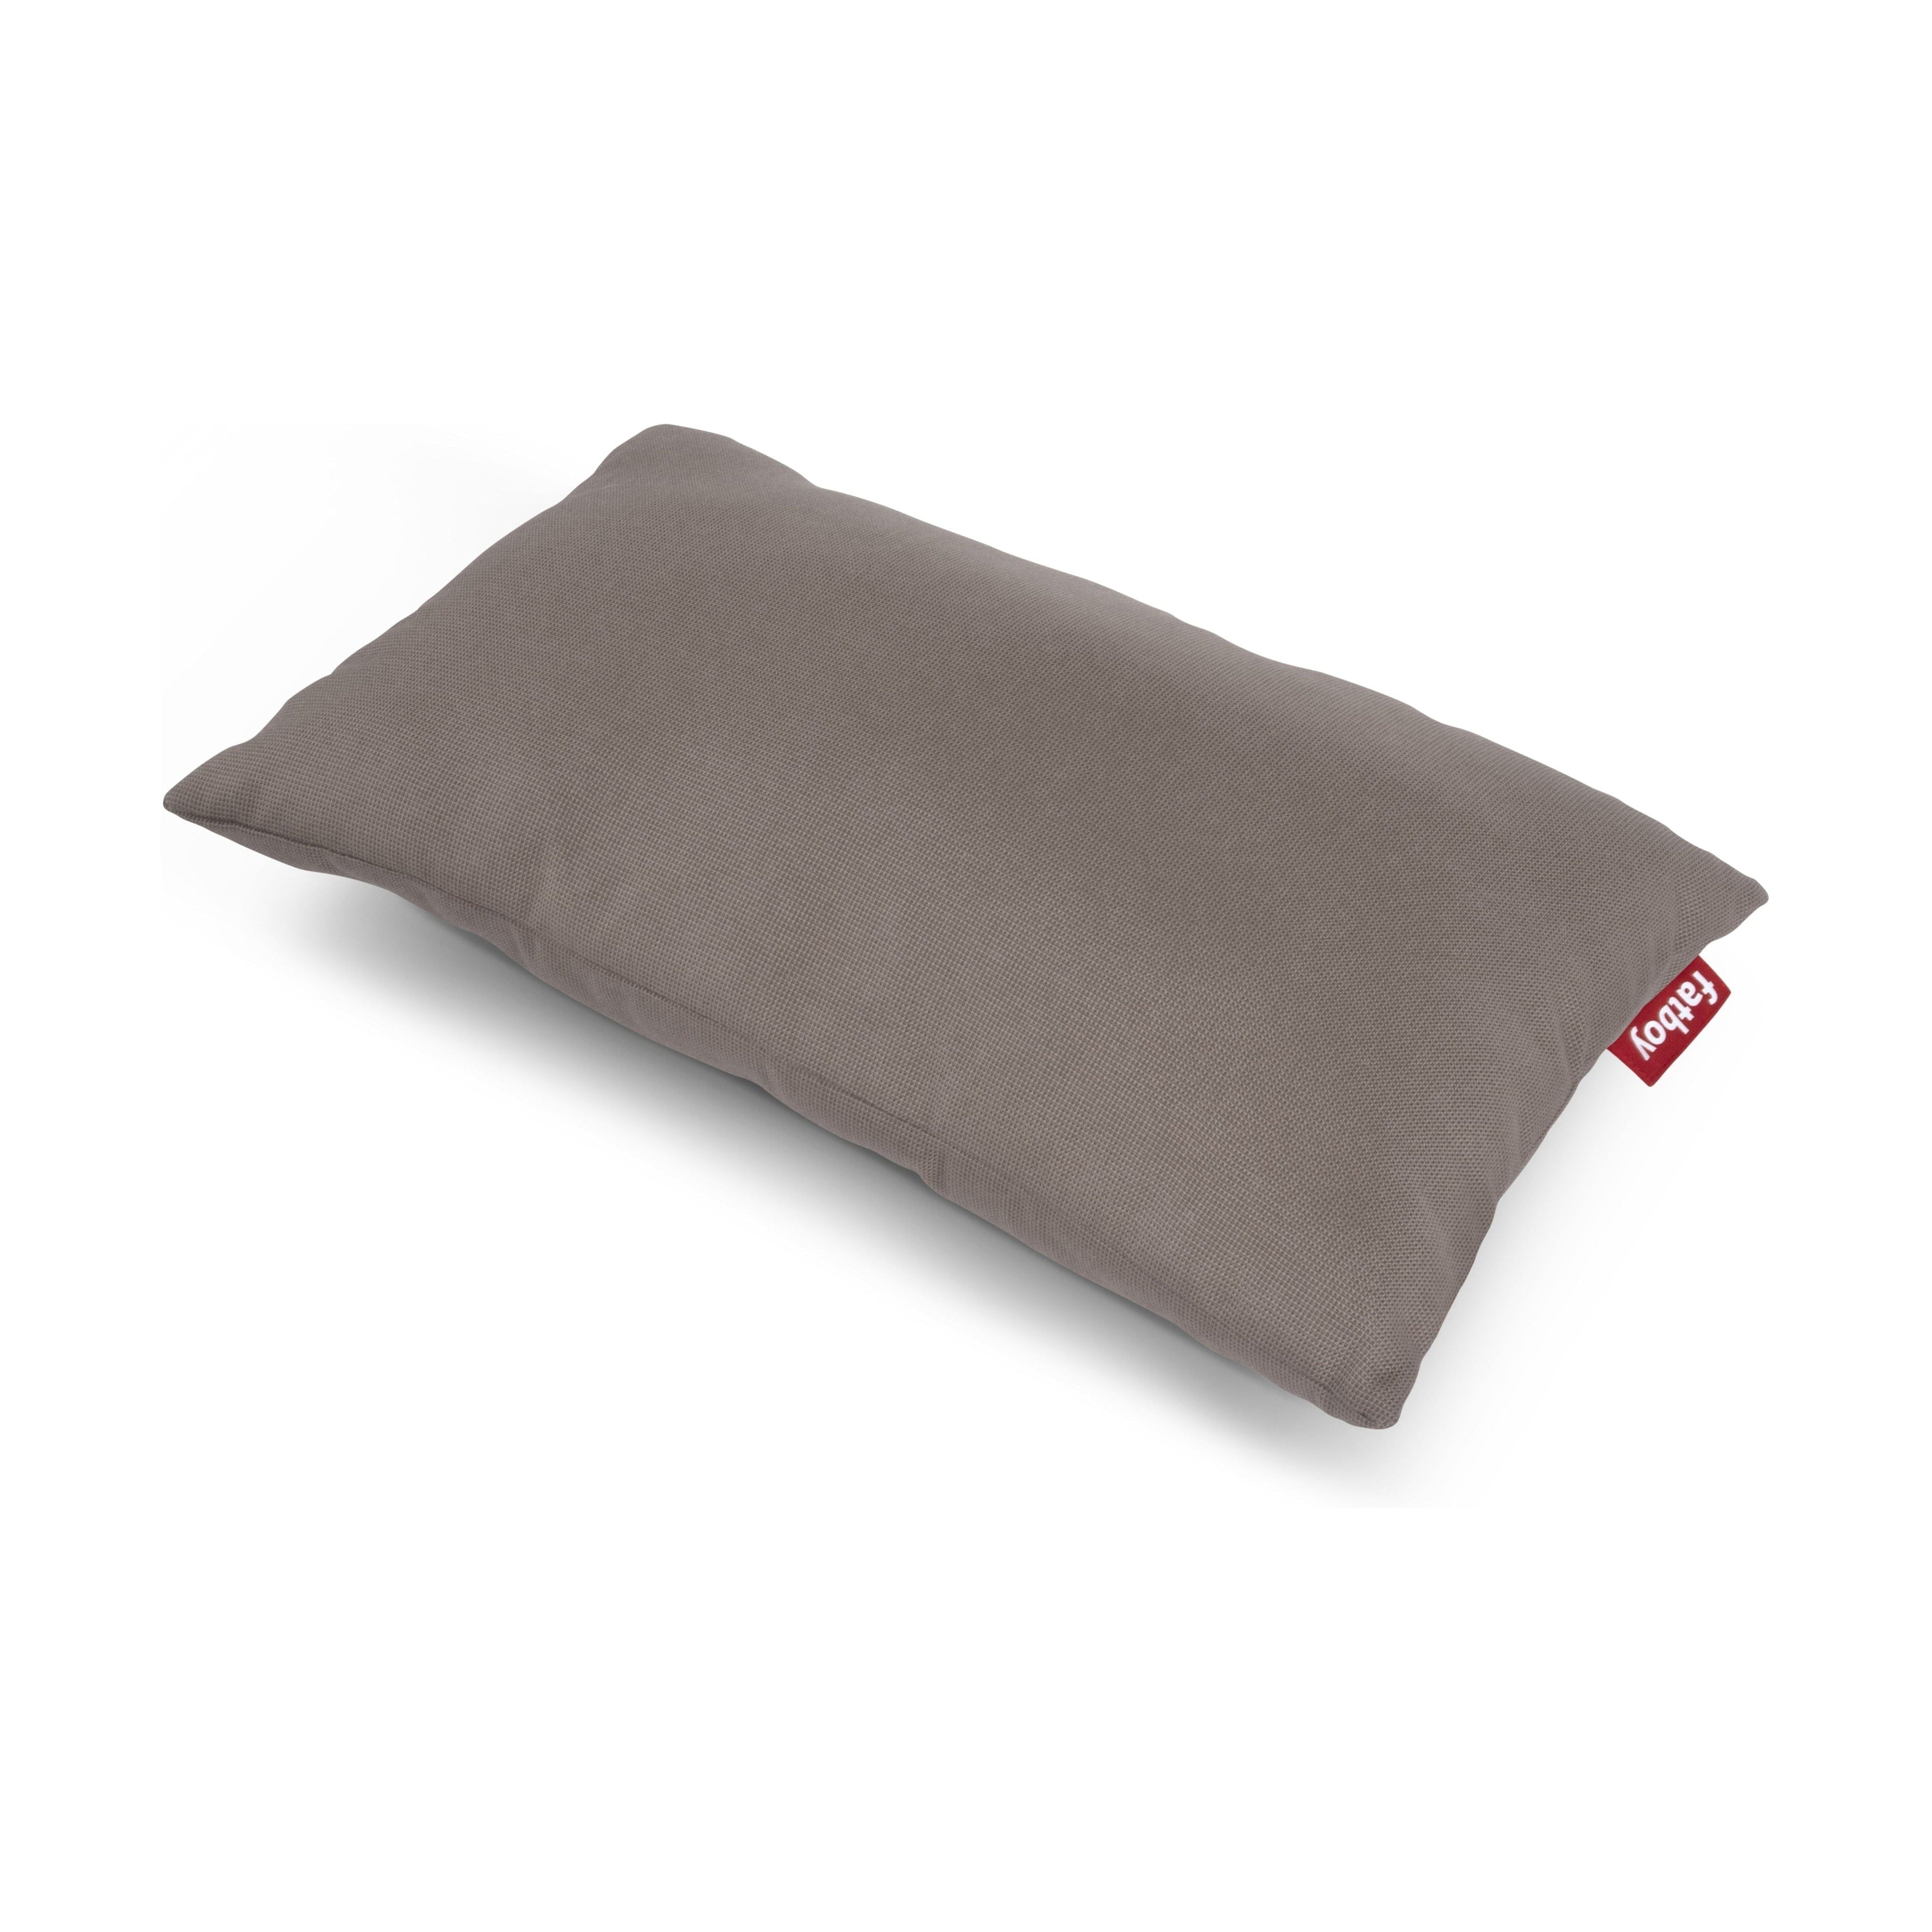 Fatboy Pillow King Outdoor, Tope